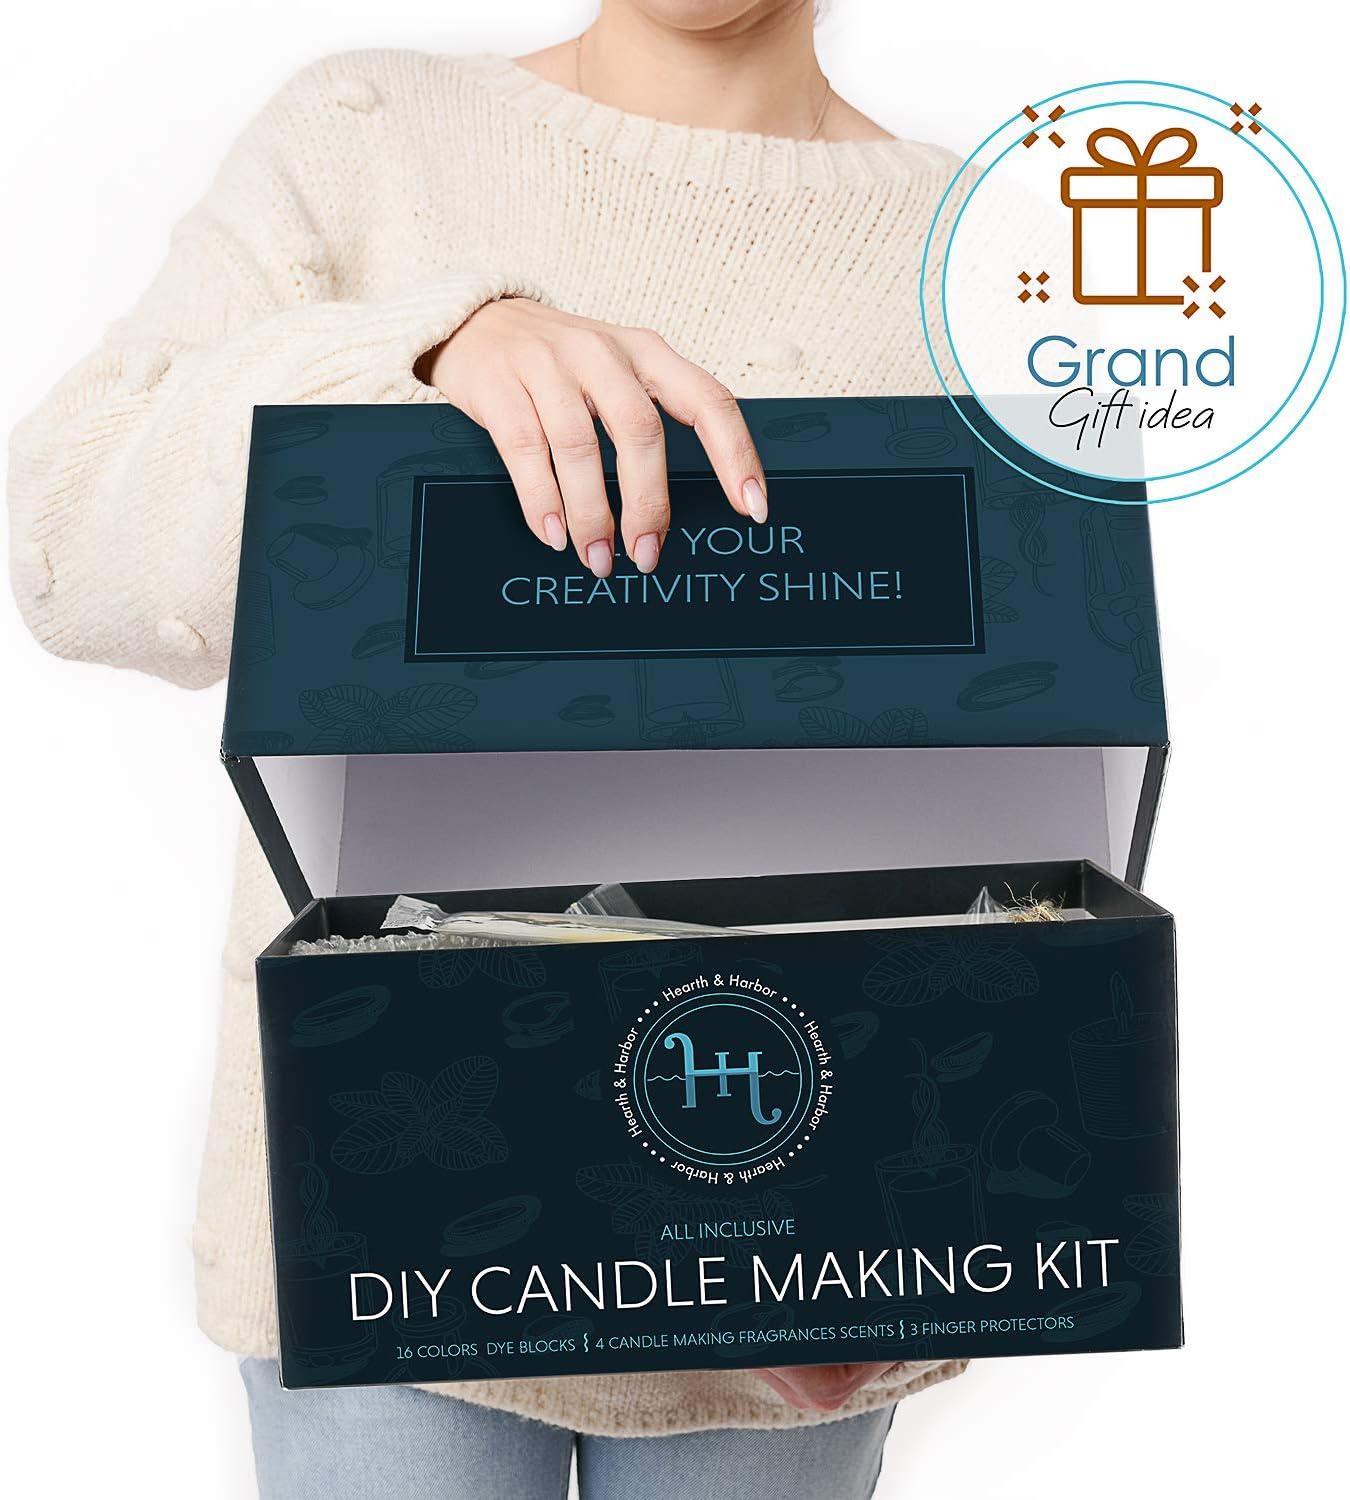 Hearth & Harbor Soy Candle Making Kit for Adults & Kids, Candle Making  Supplies, DIY Candle Making Kit for Beginners, Natural Soy Wax Candle  Making Kits - Complete Candle Kit, 2 Lbs